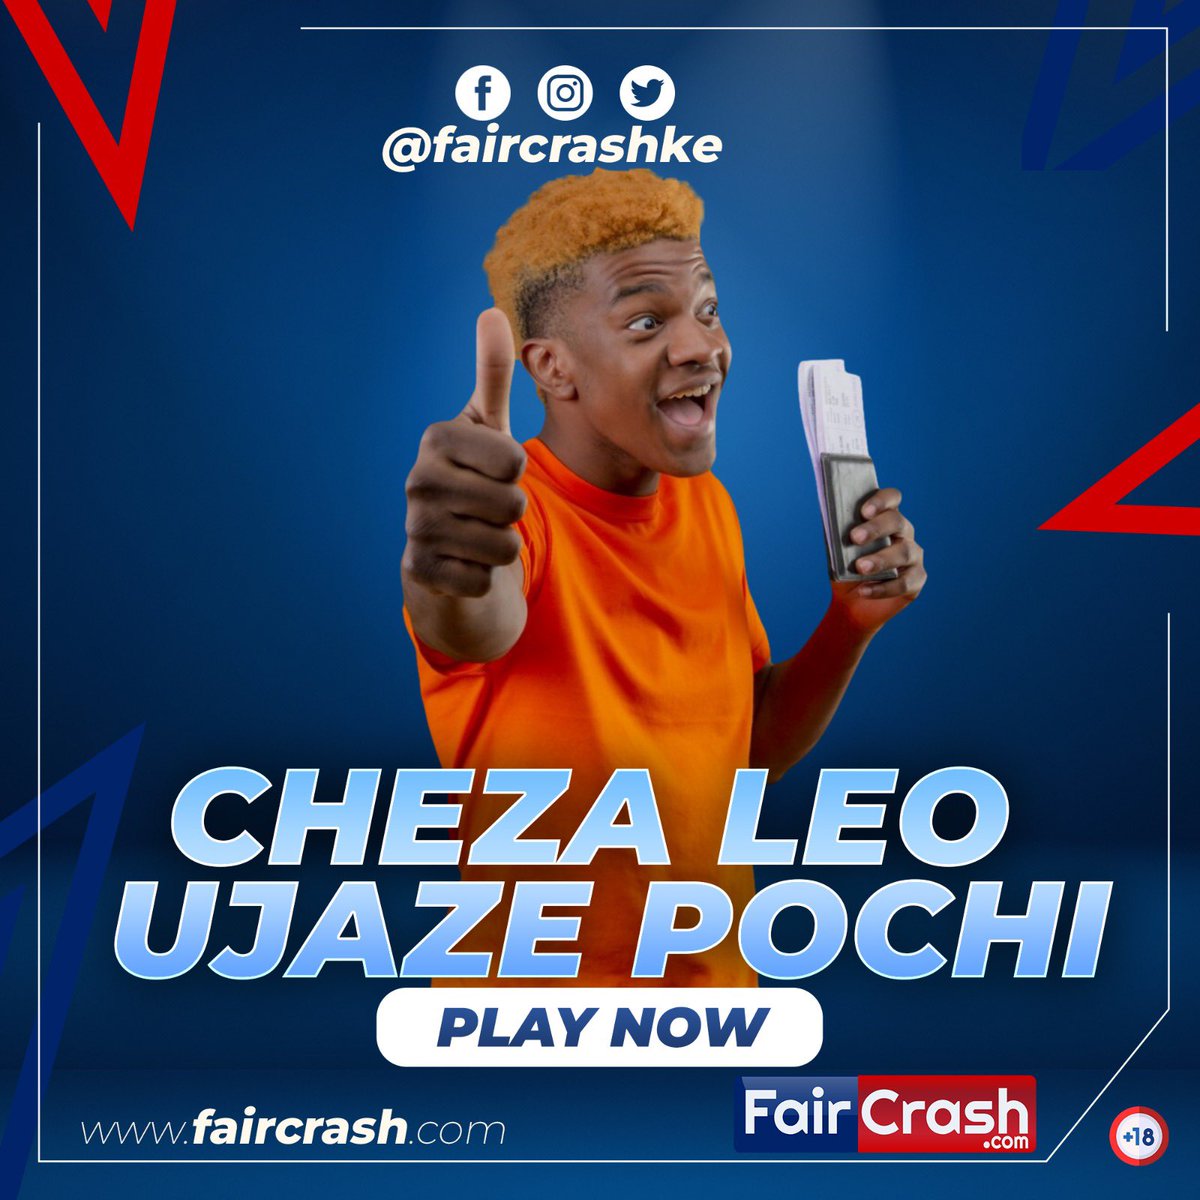 Get in the game and win big with FairCrash.com !  Cheza Leo to fill your pockets with up to 5000x your bet. Don't miss out on the excitement - join now and let the winnings roll in.
#faircrash #winbig 
#CrashGame #MultiplierMania 
#onlinegaming #fun 💯💯